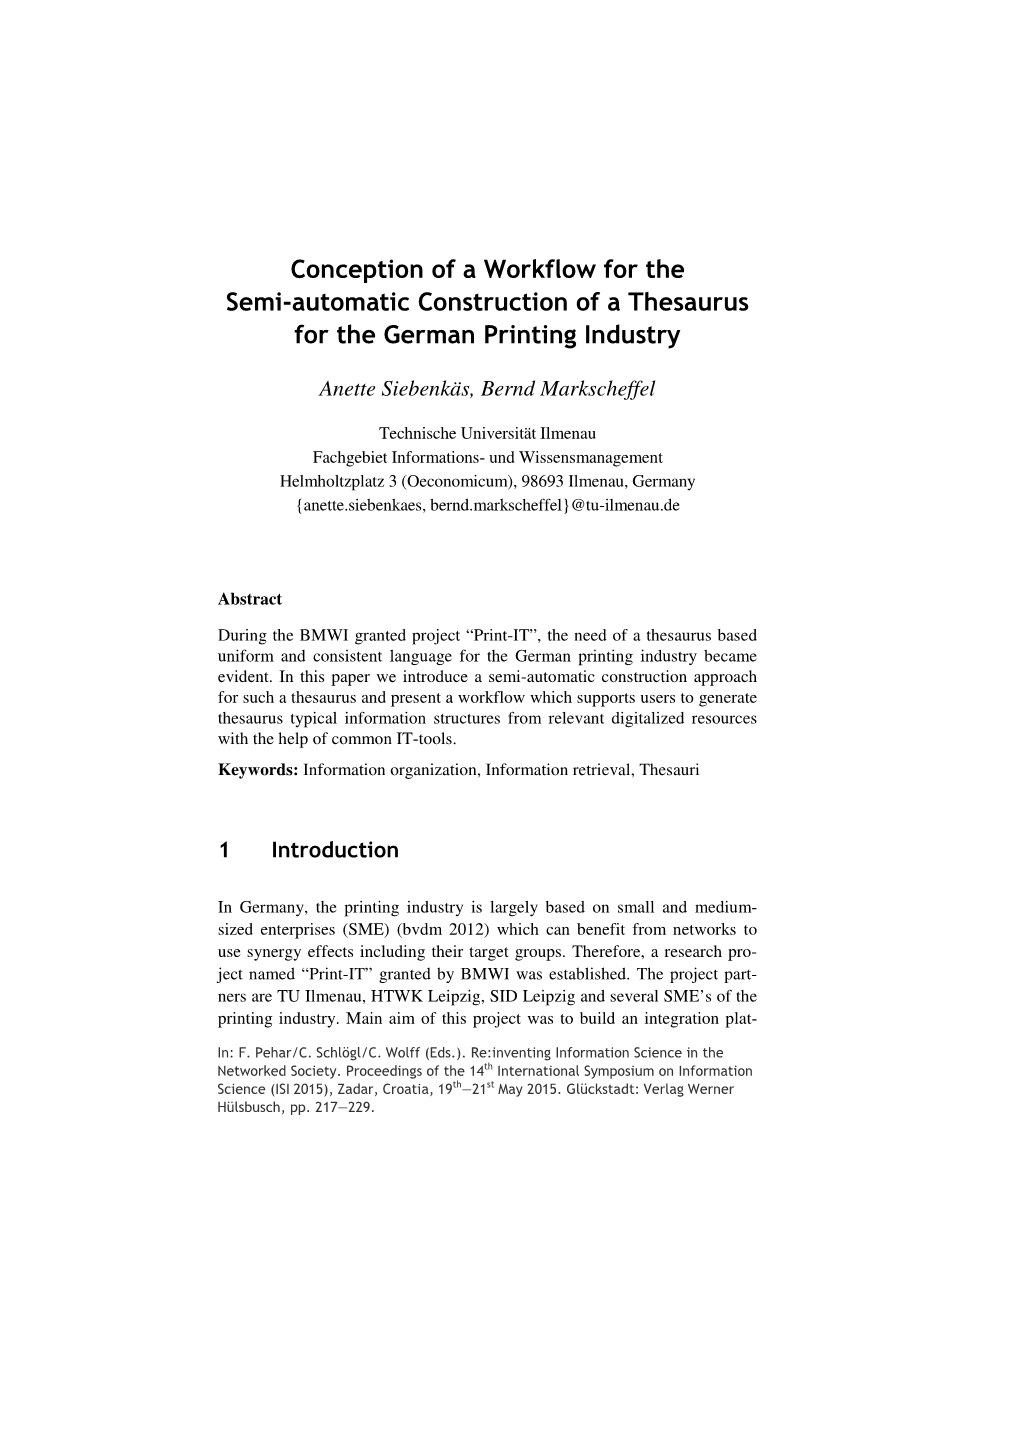 Conception of a Workflow for the Semi-Automatic Construction of a